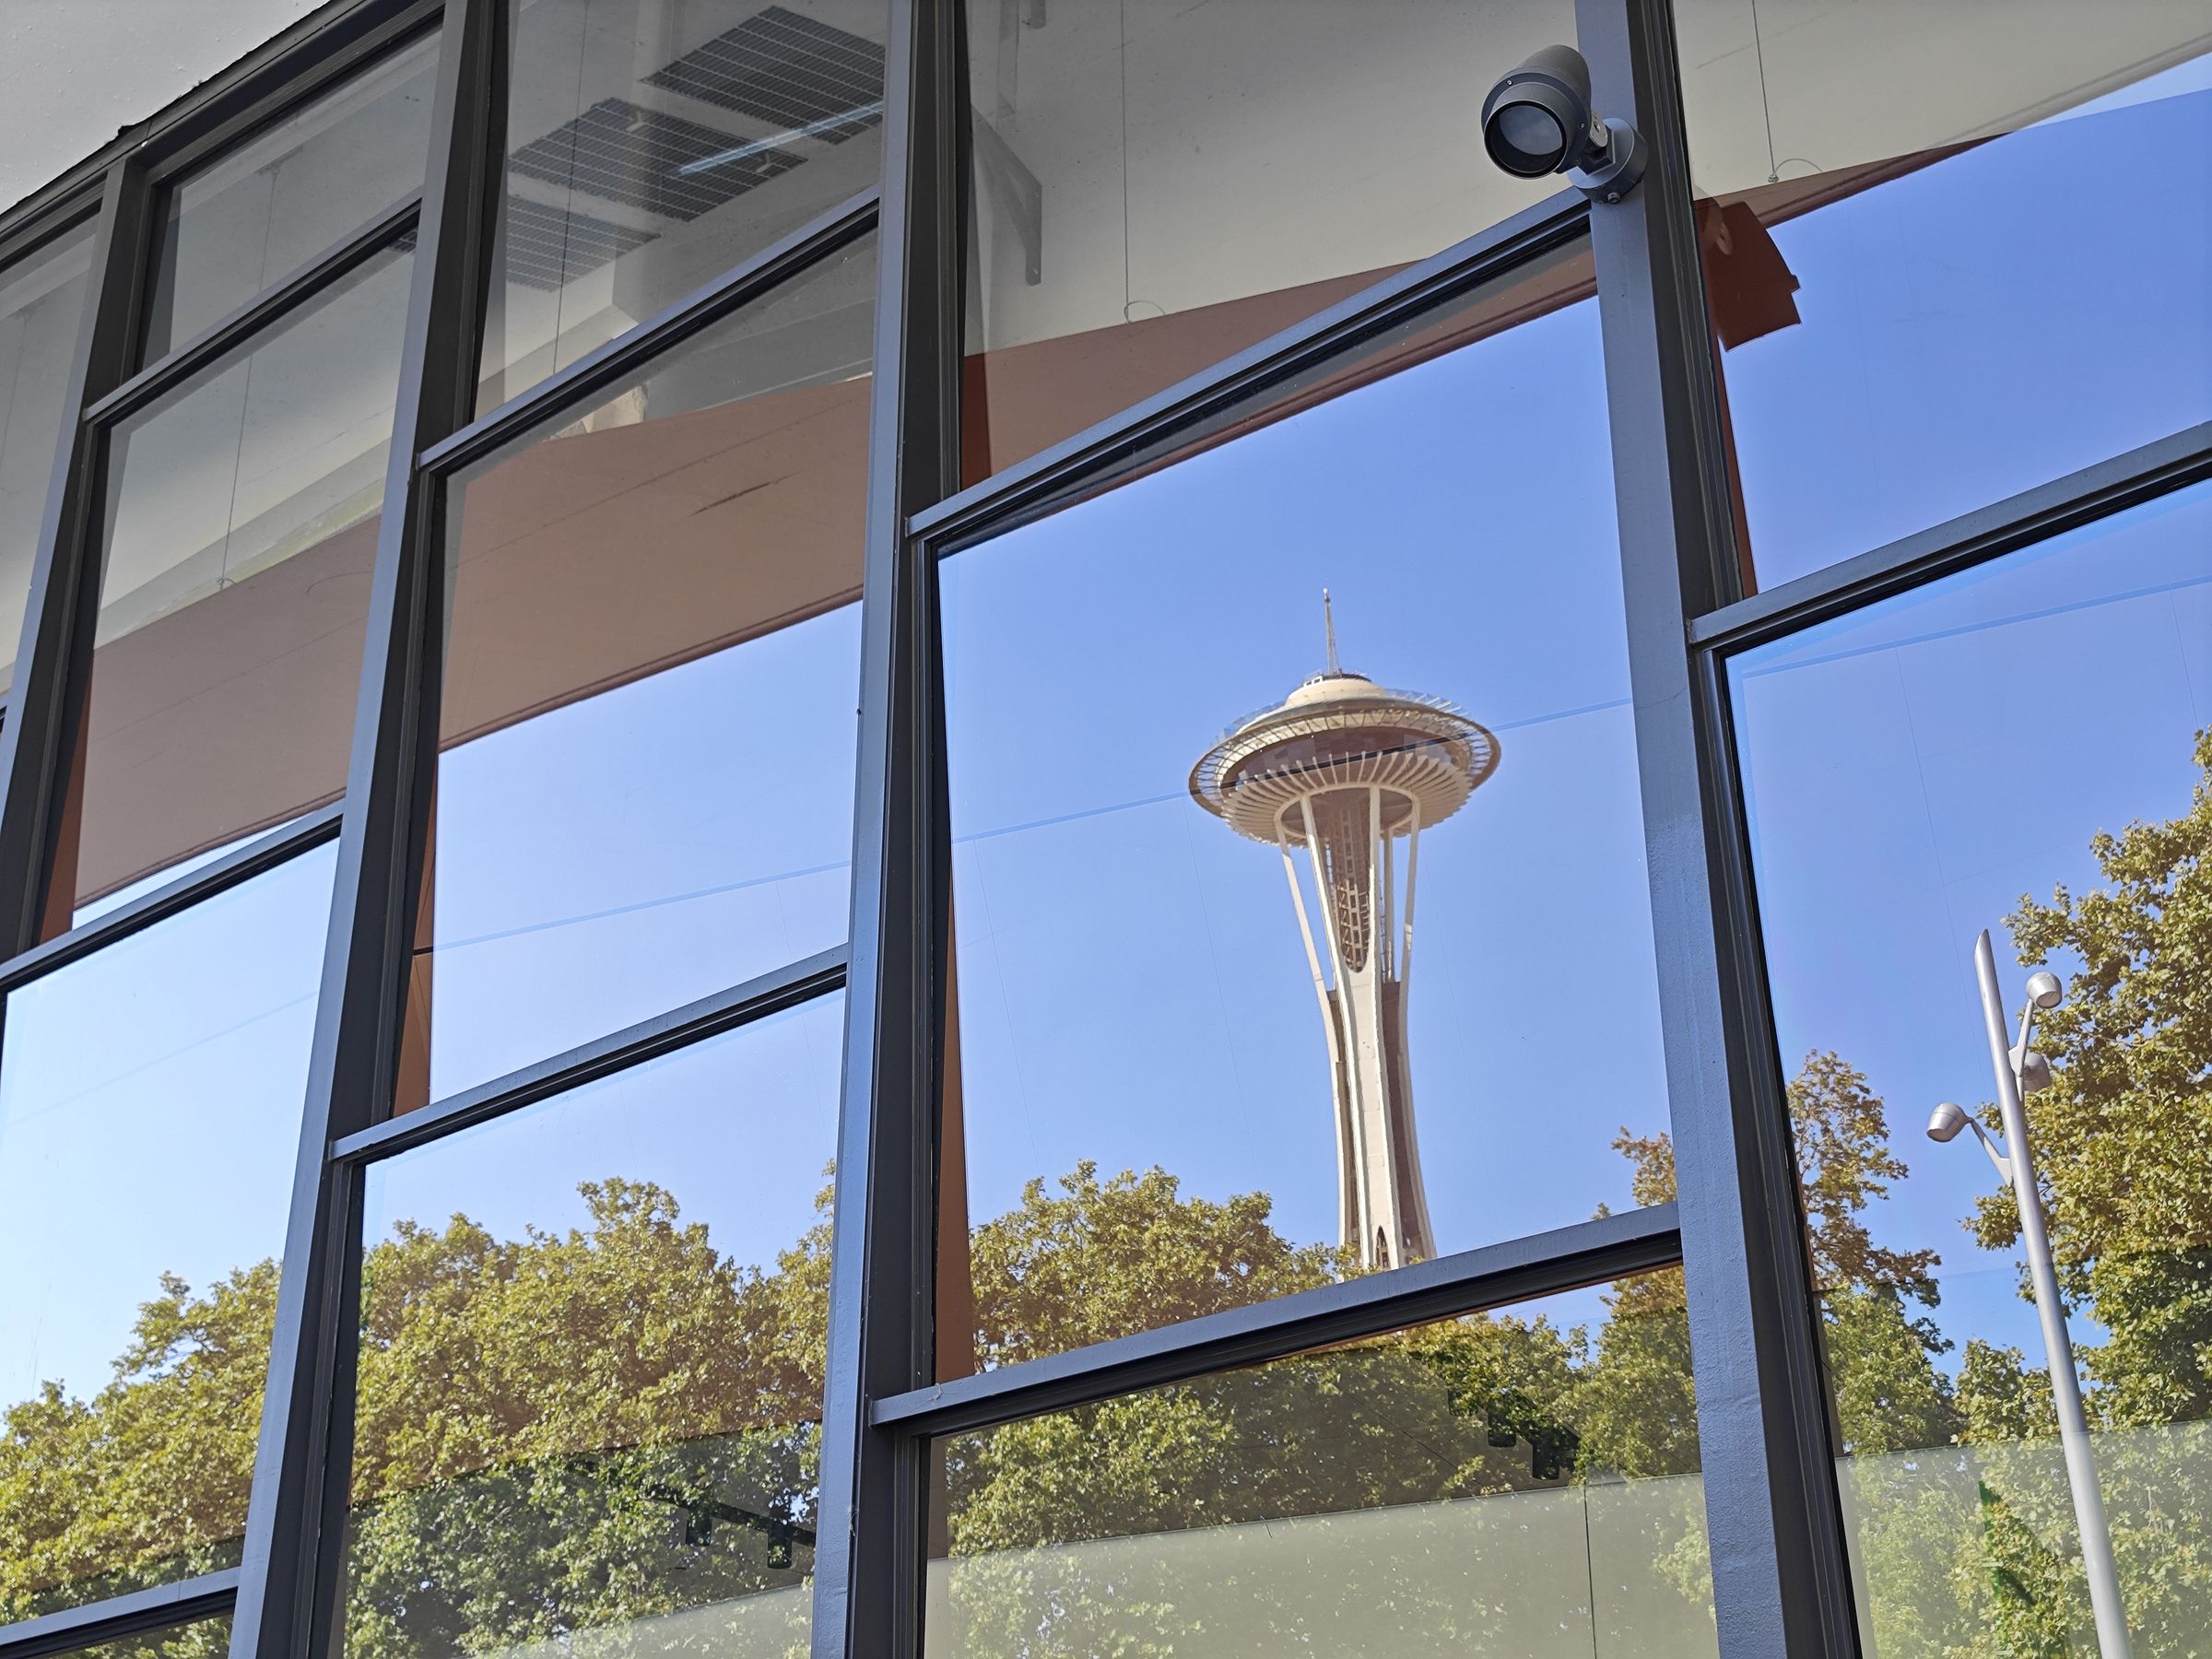 Photo of reflection of the Space Needle in a window.